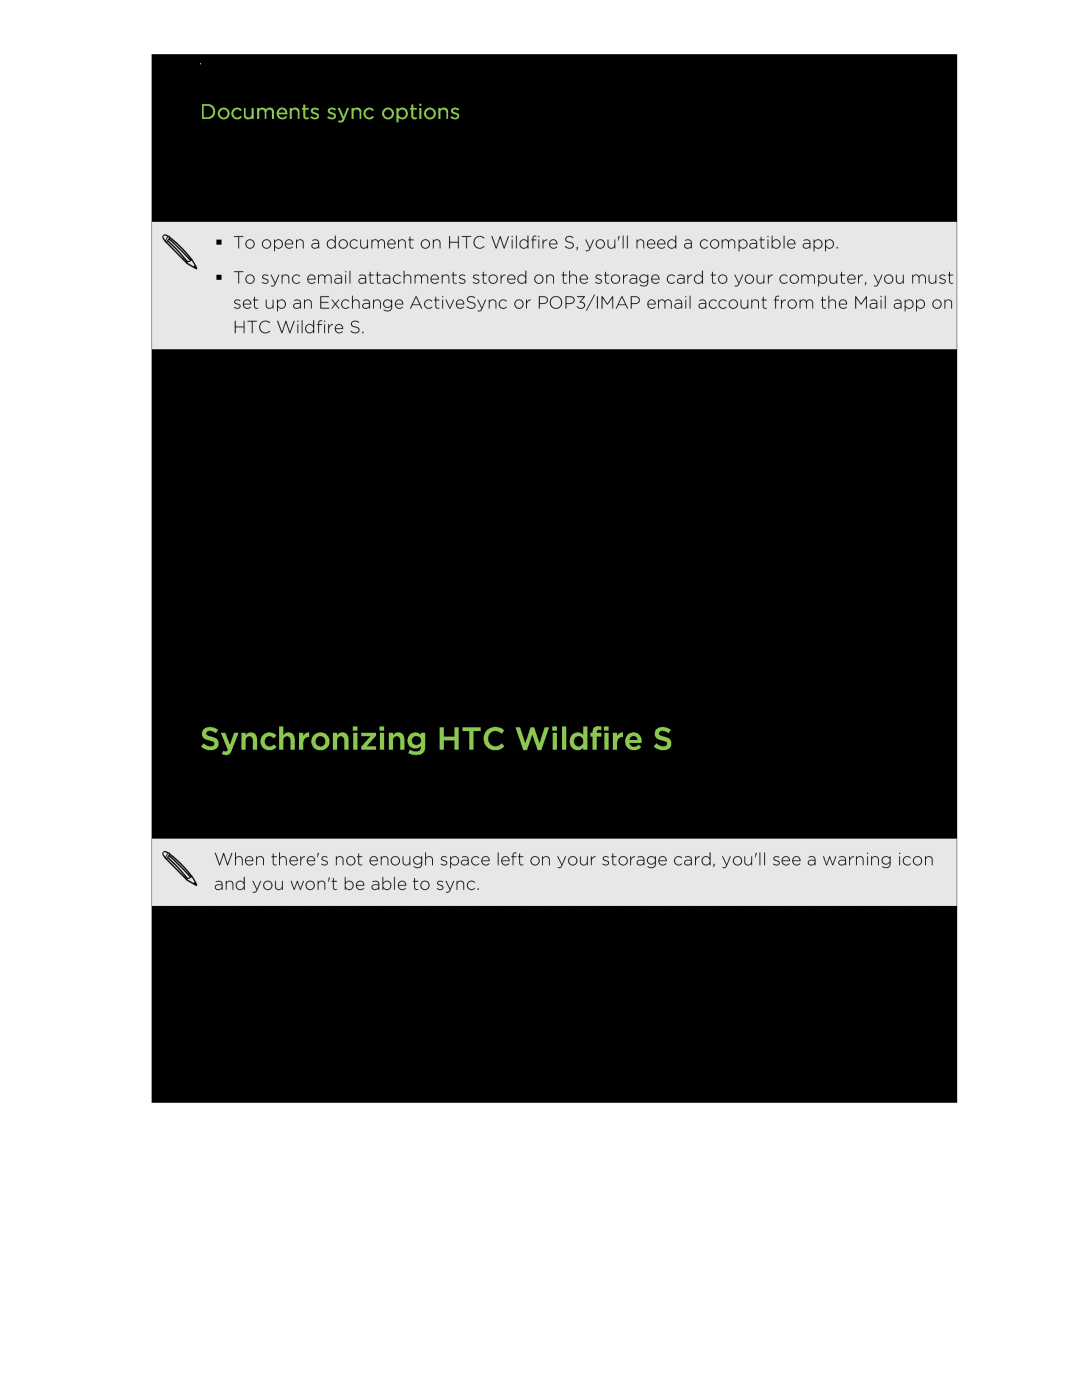 HTC manual Synchronizing HTC Wildfire S, Documents sync options 